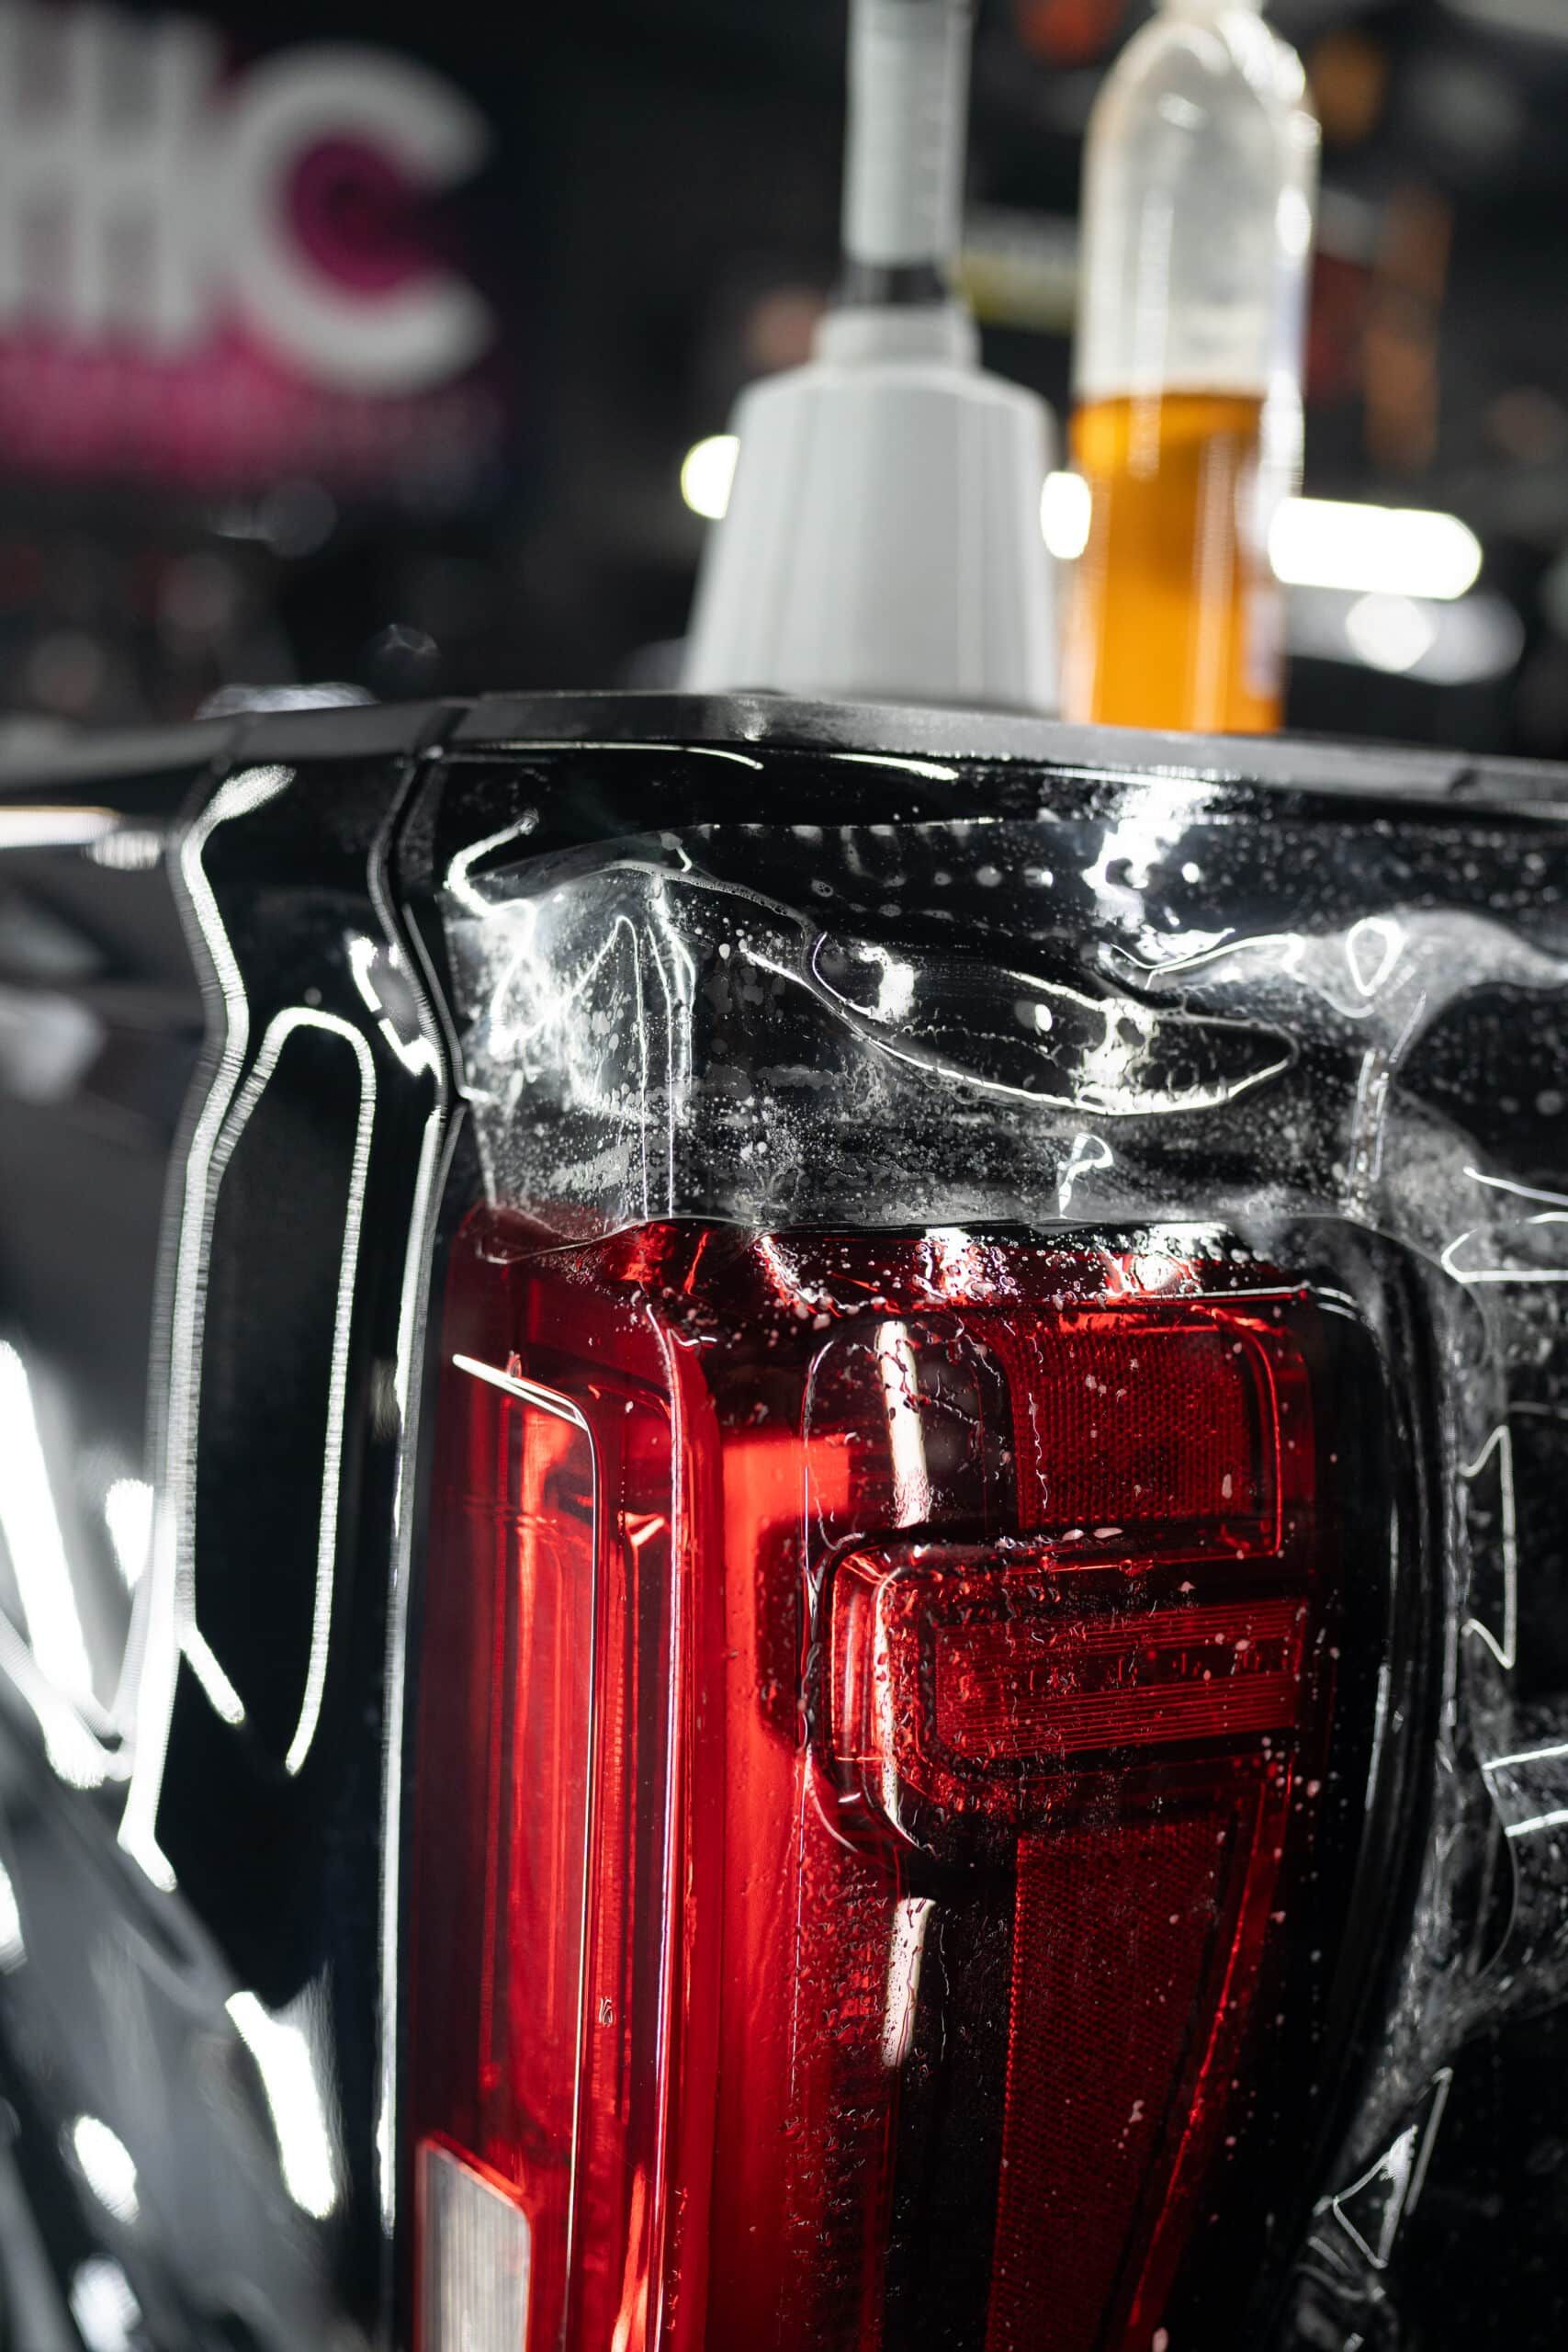 A close up of a red car tail light wrapped in plastic.